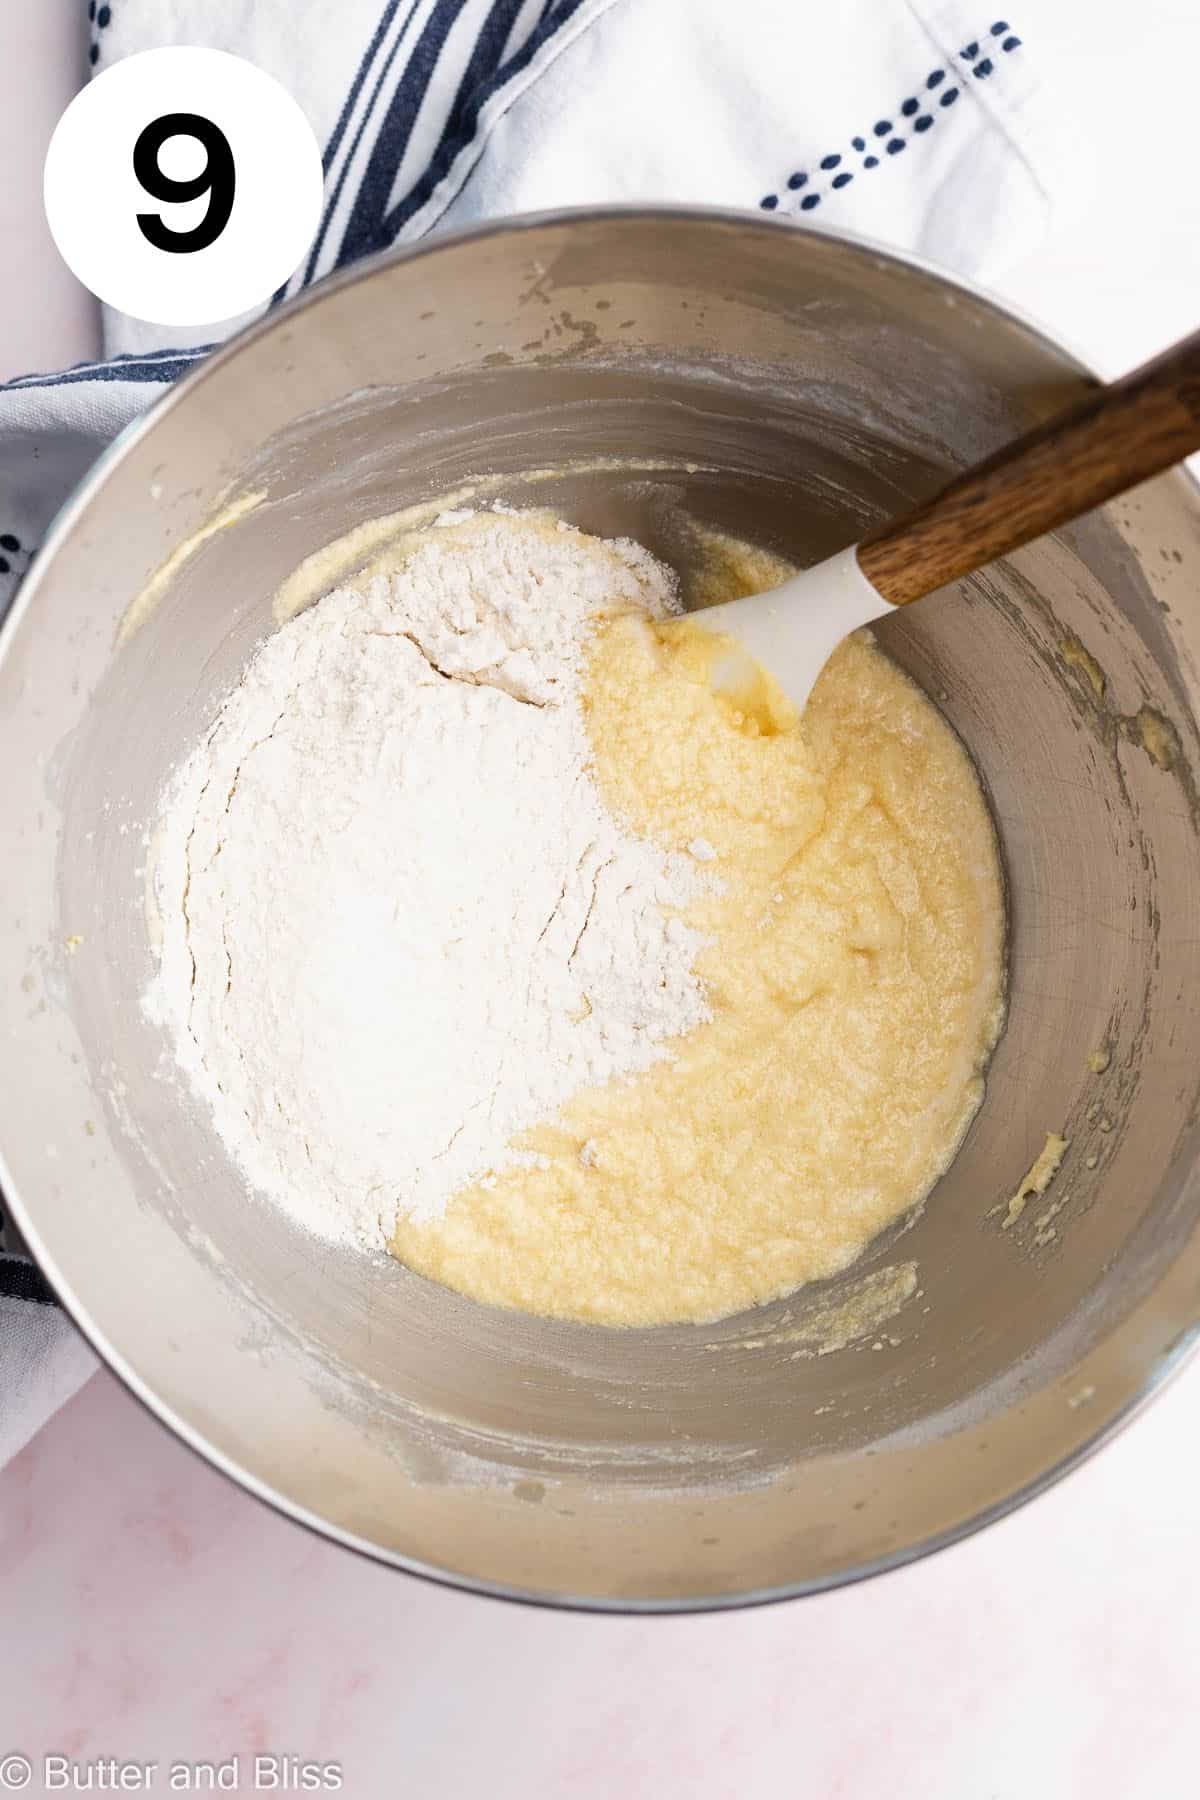 The last addition of flour being added to a cake batter in a mixing bowl.